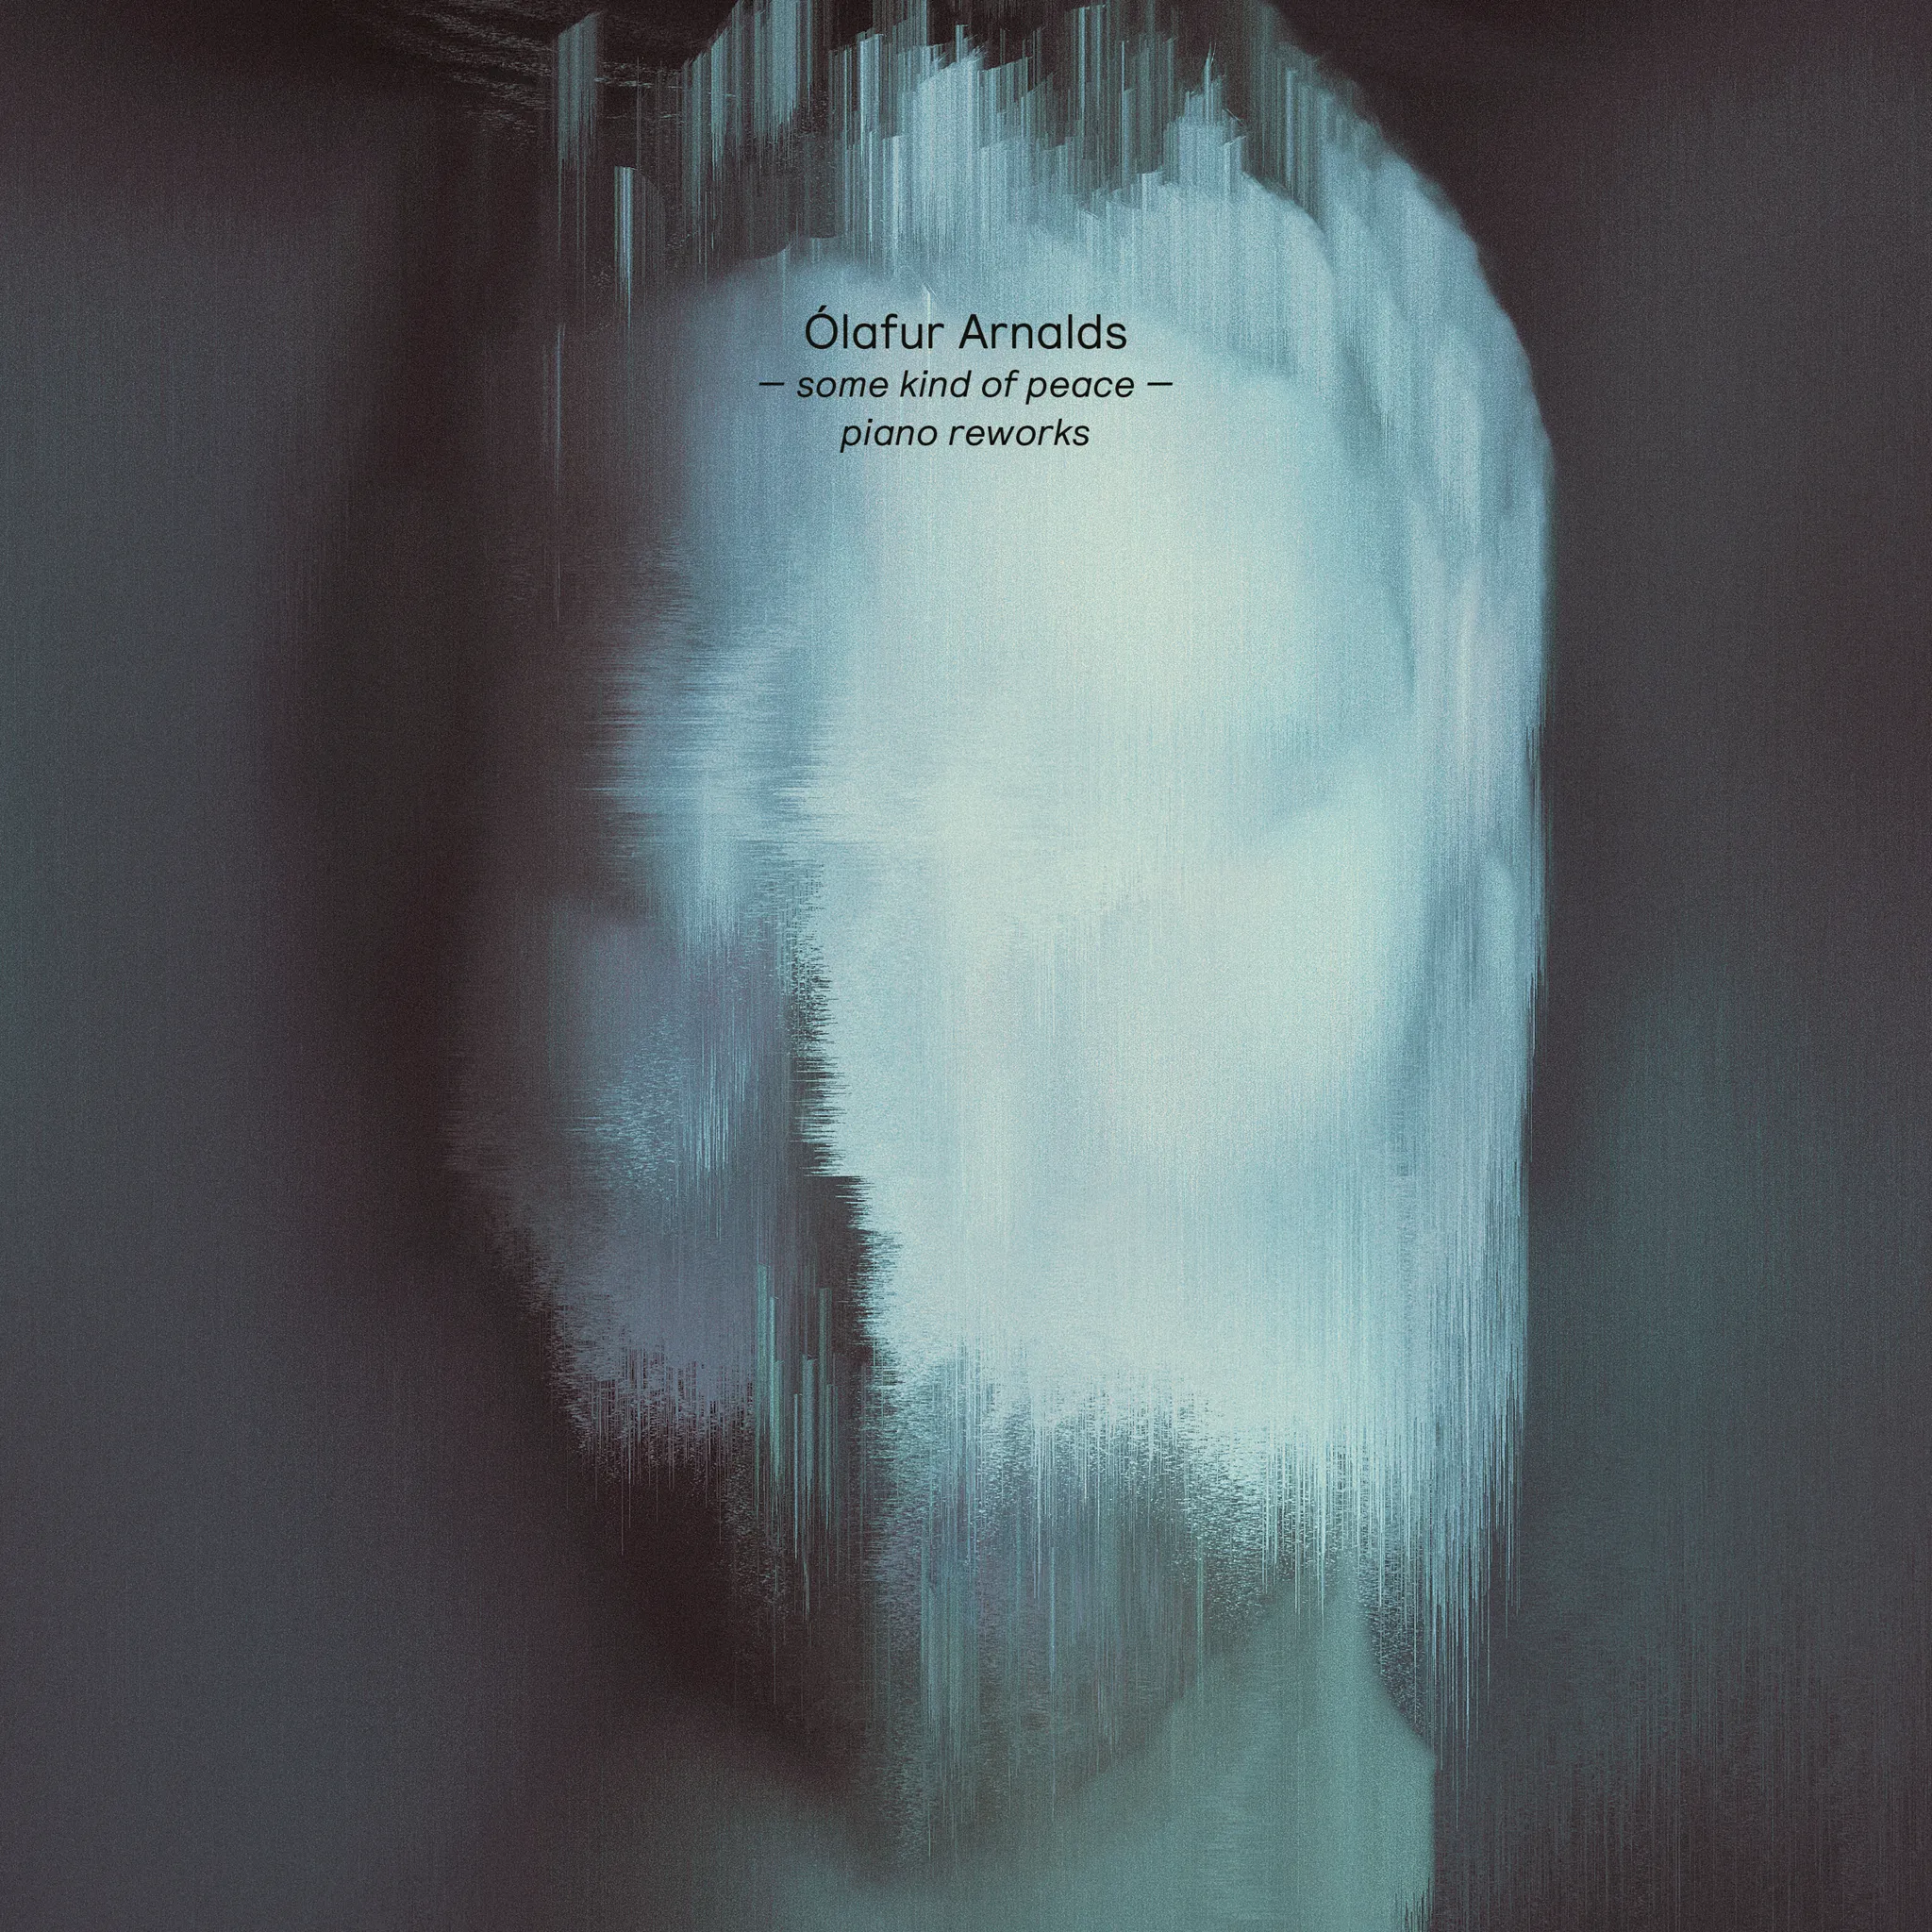 <strong>Olafur Arnalds - some kind of peace - piano reworks</strong> (Vinyl LP - black)